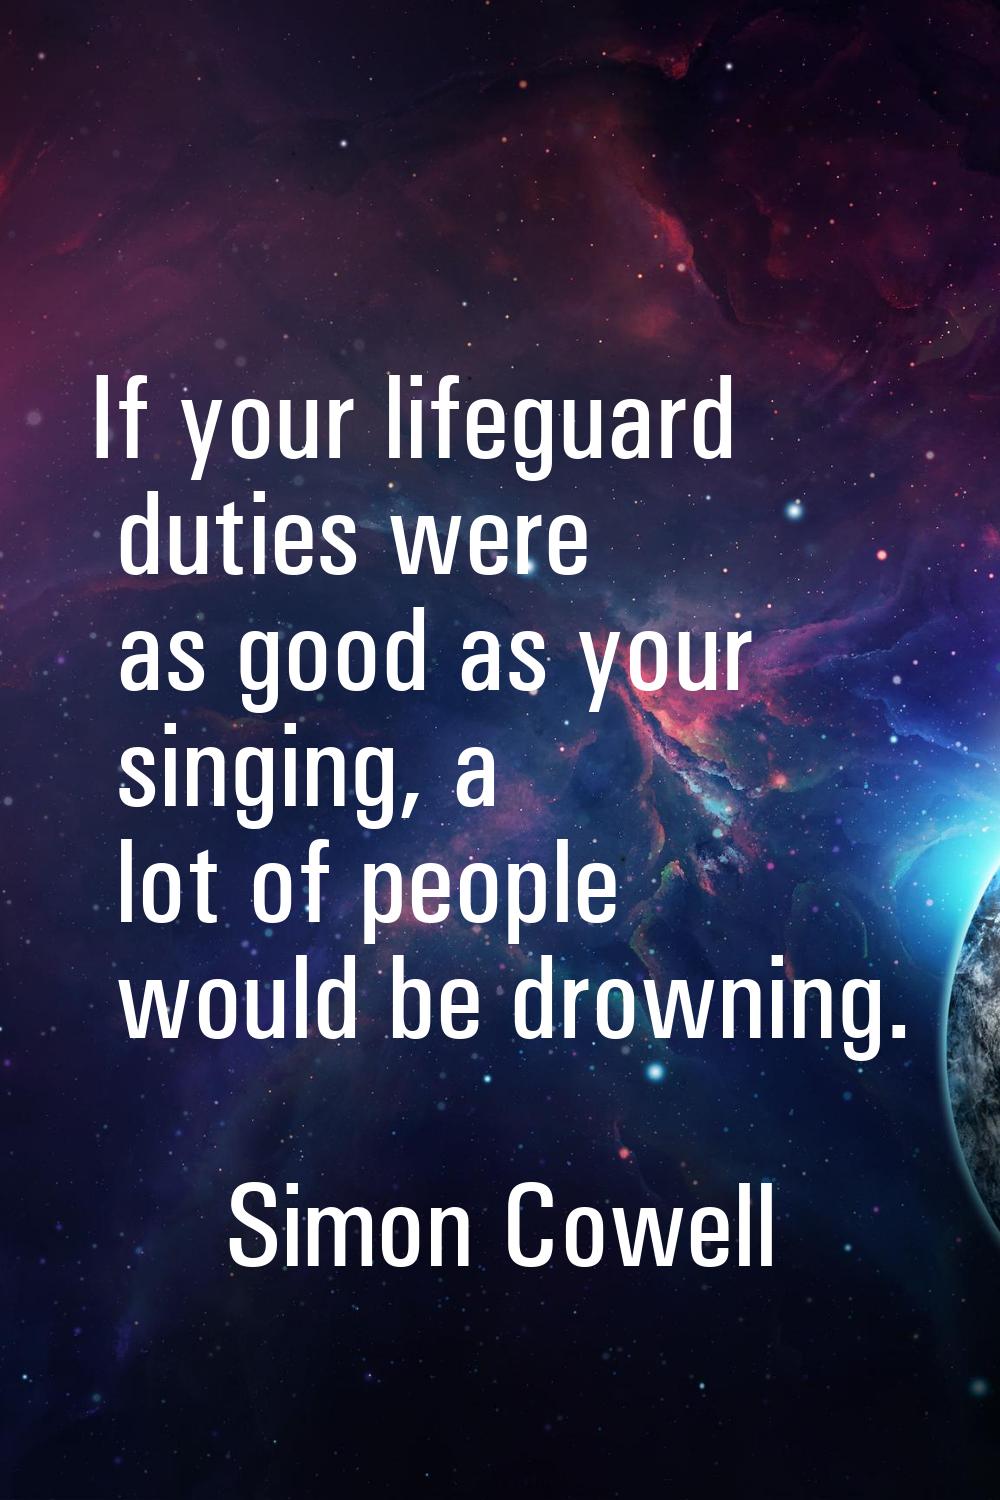 If your lifeguard duties were as good as your singing, a lot of people would be drowning.